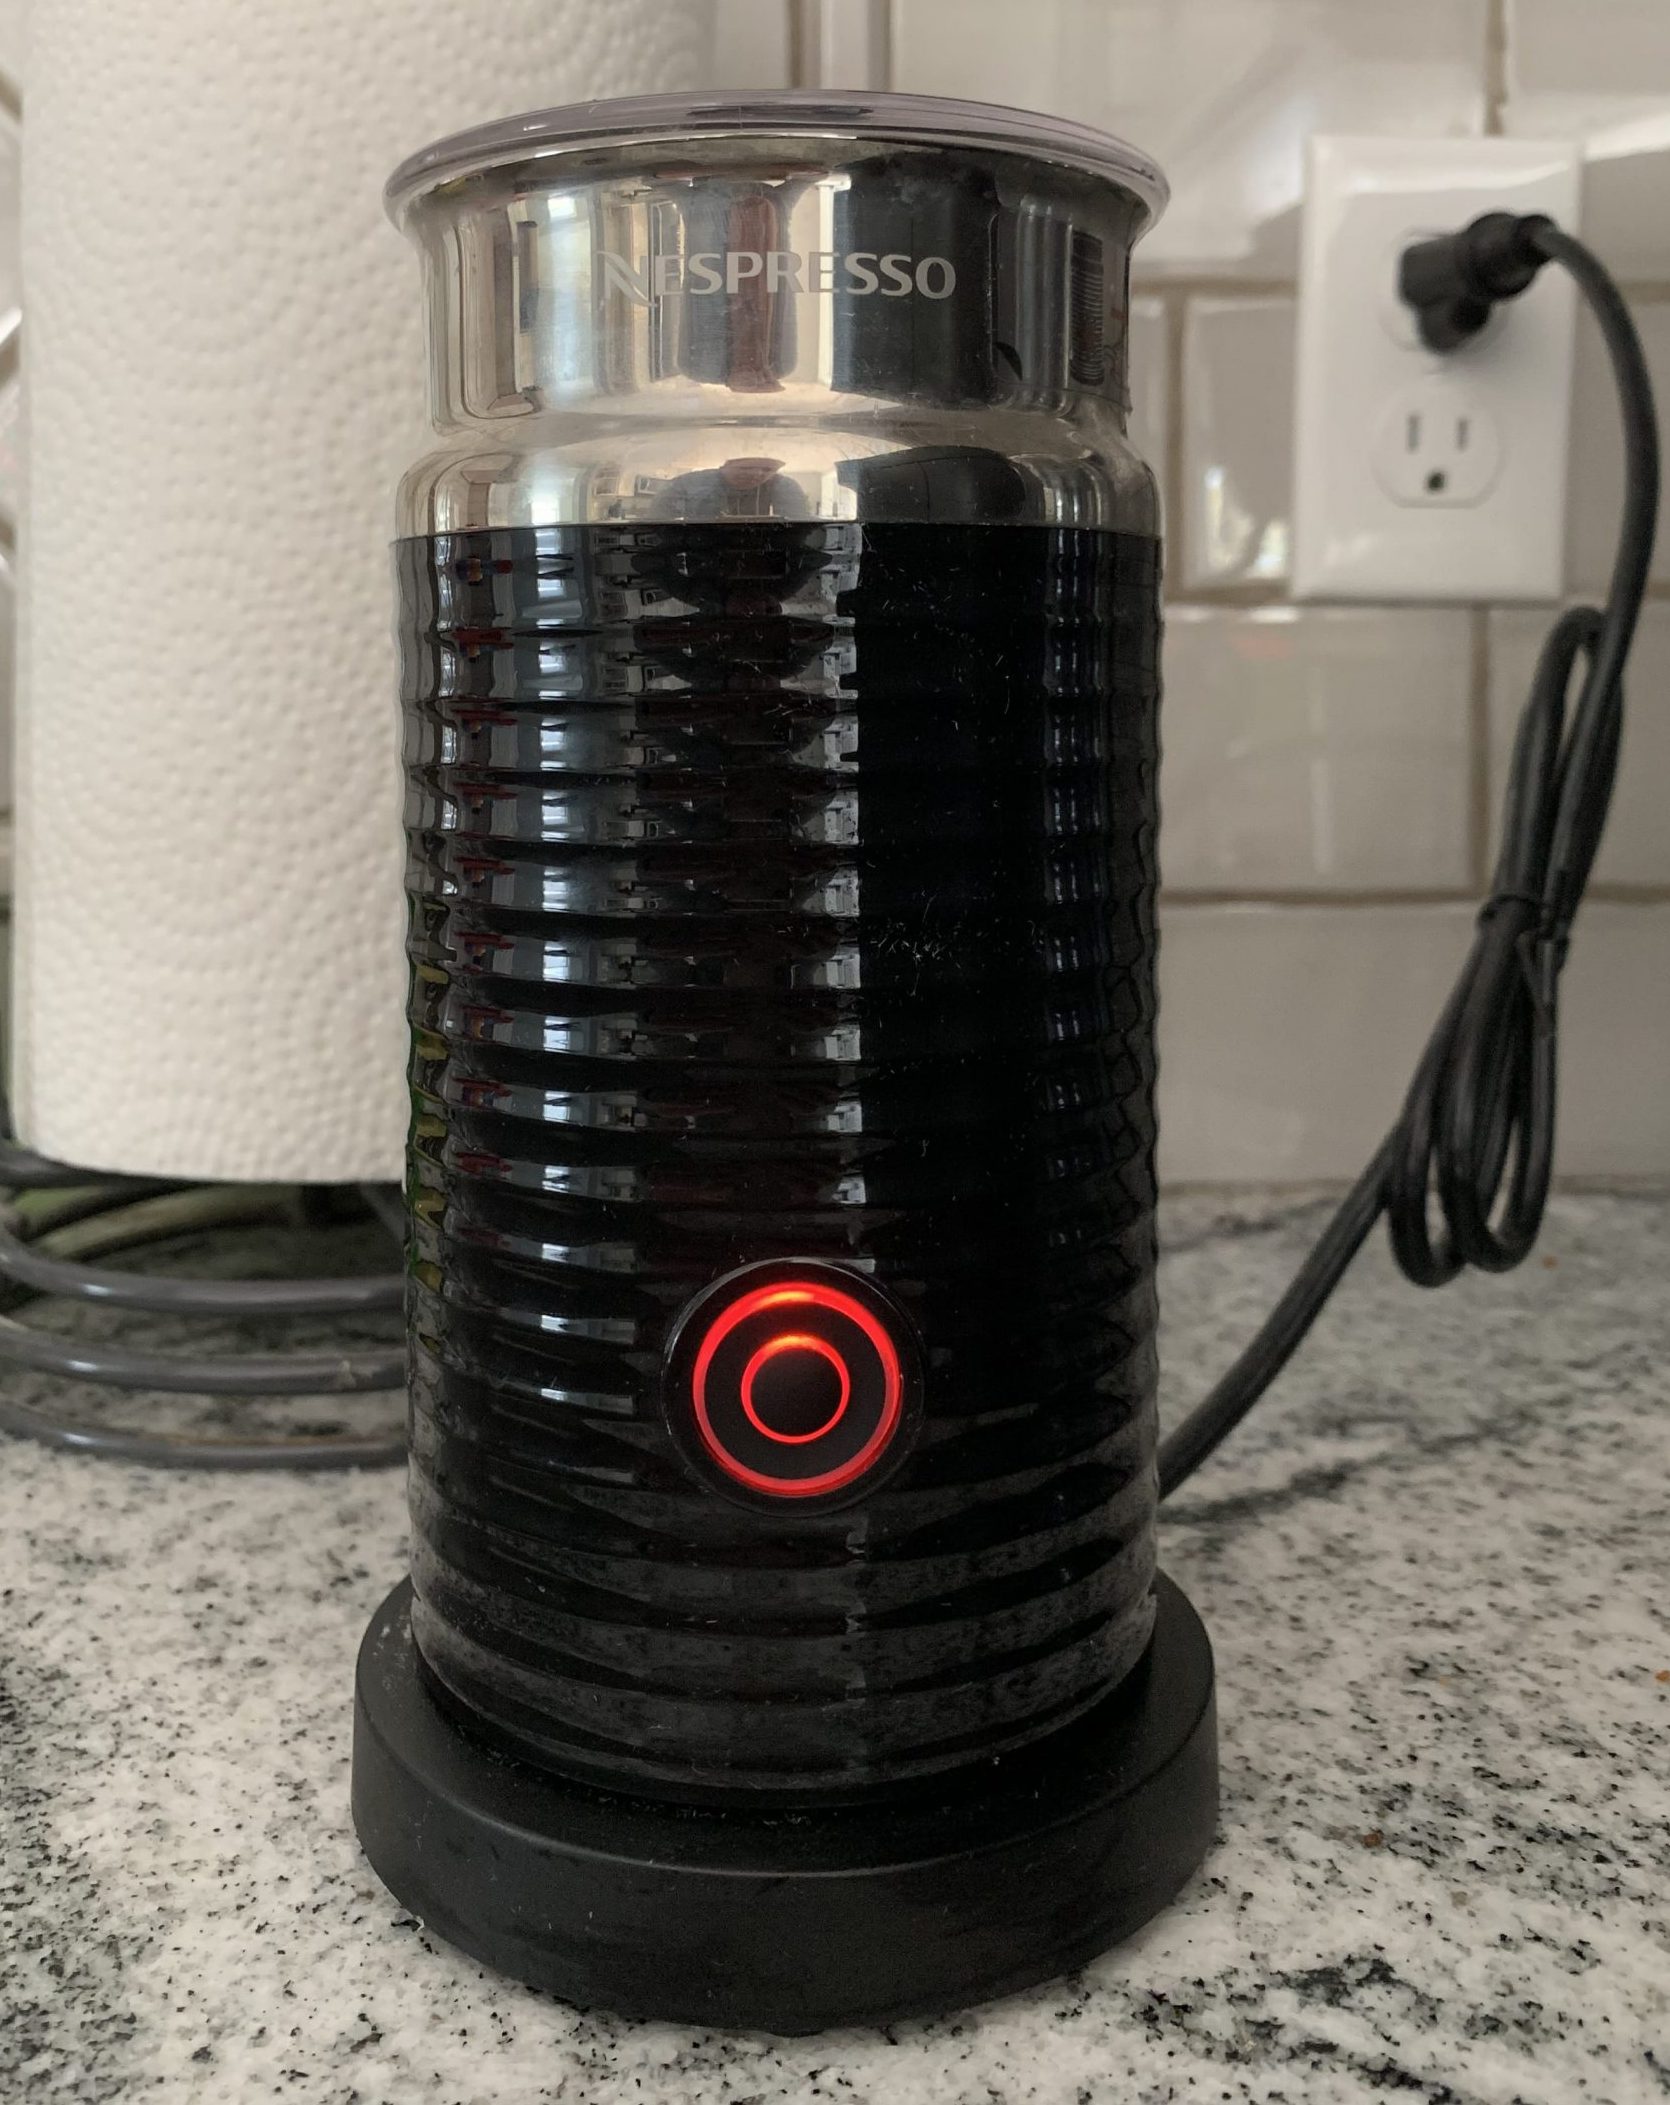 Why Is My Frother Blinking Red? Top Solutions